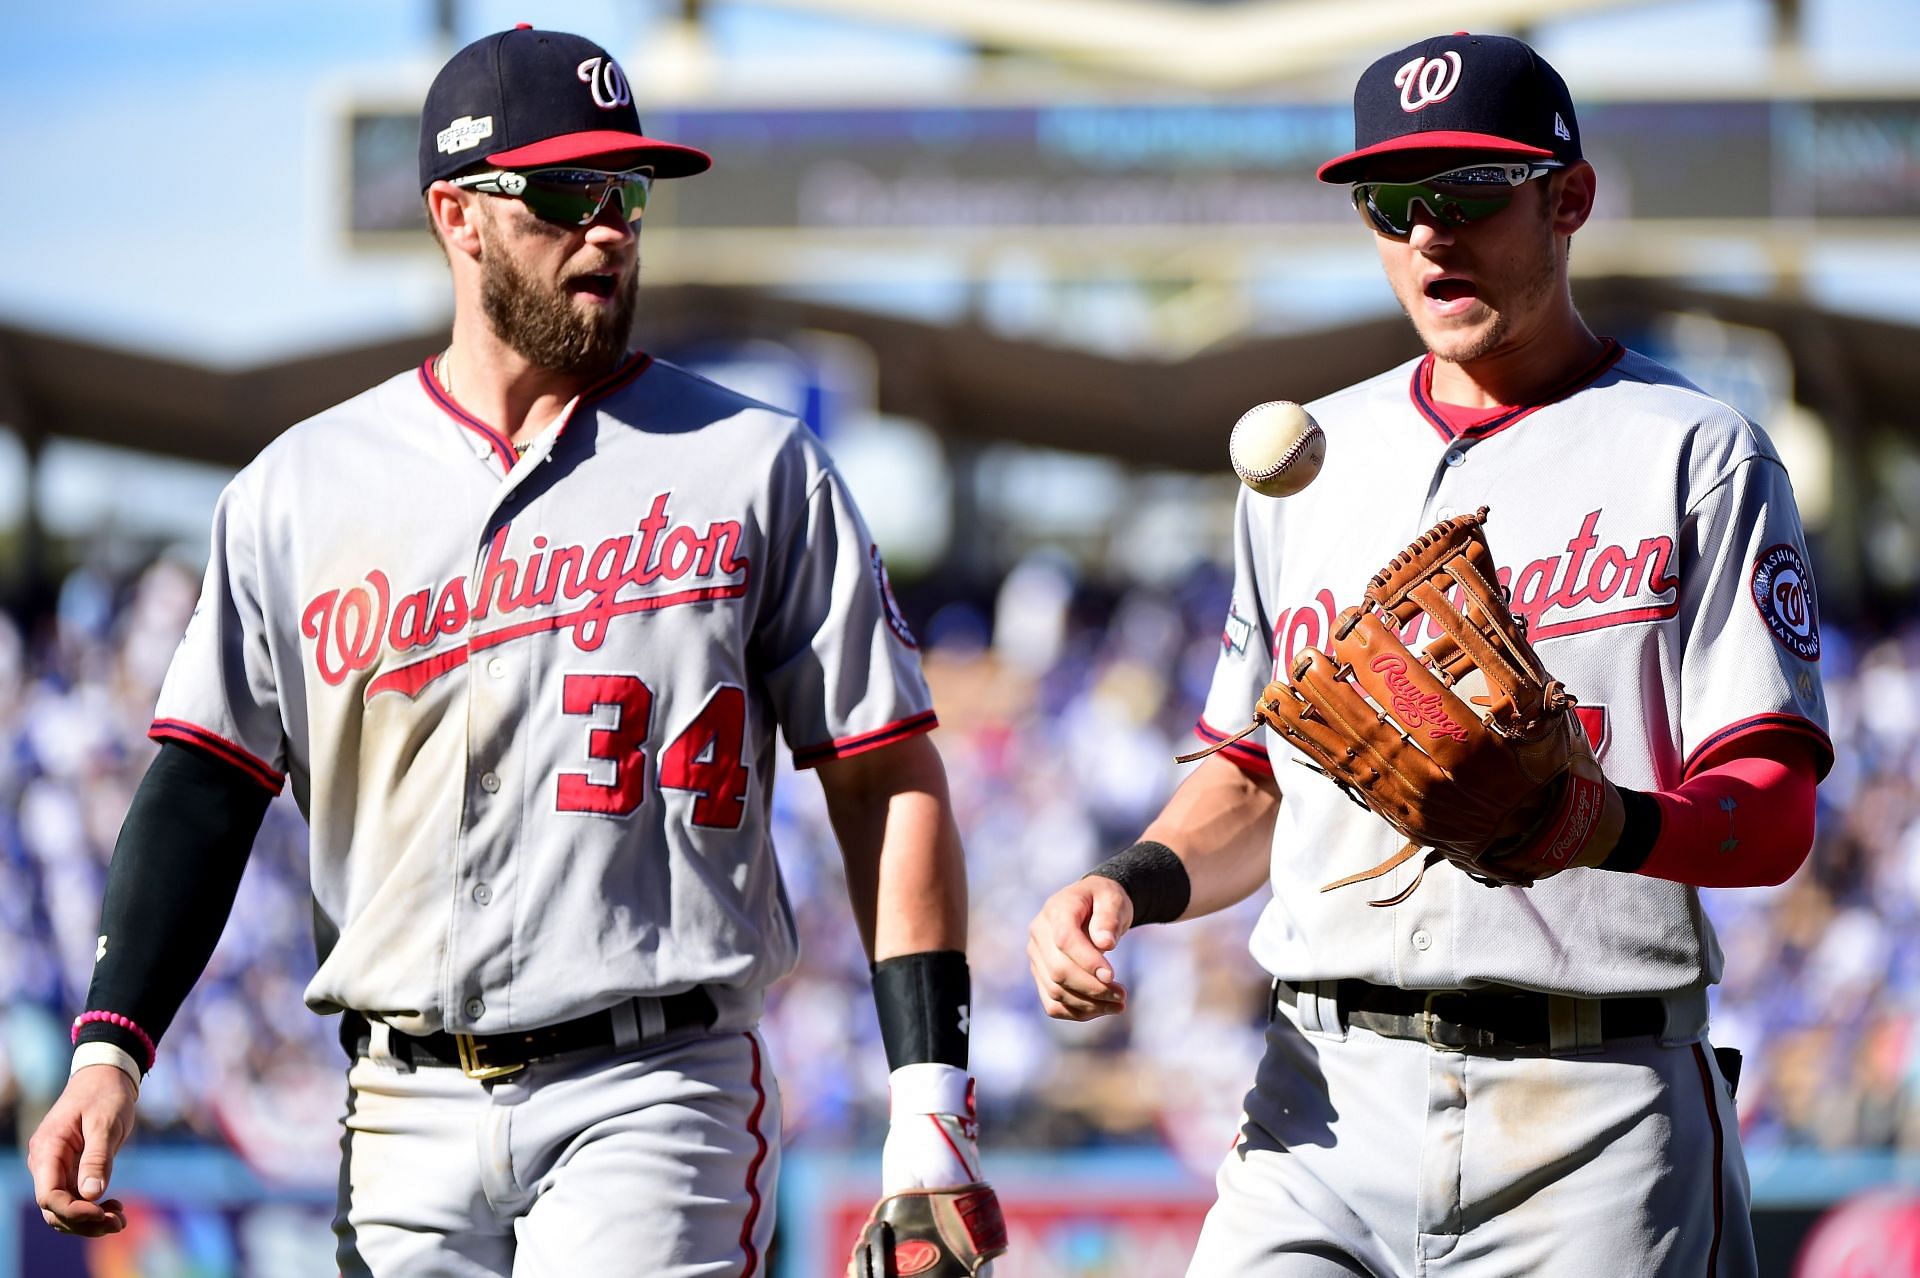 You'd look great in a Phillies uniform': How Bryce Harper did (and didn't)  recruit Trea Turner to Philly - BVM Sports